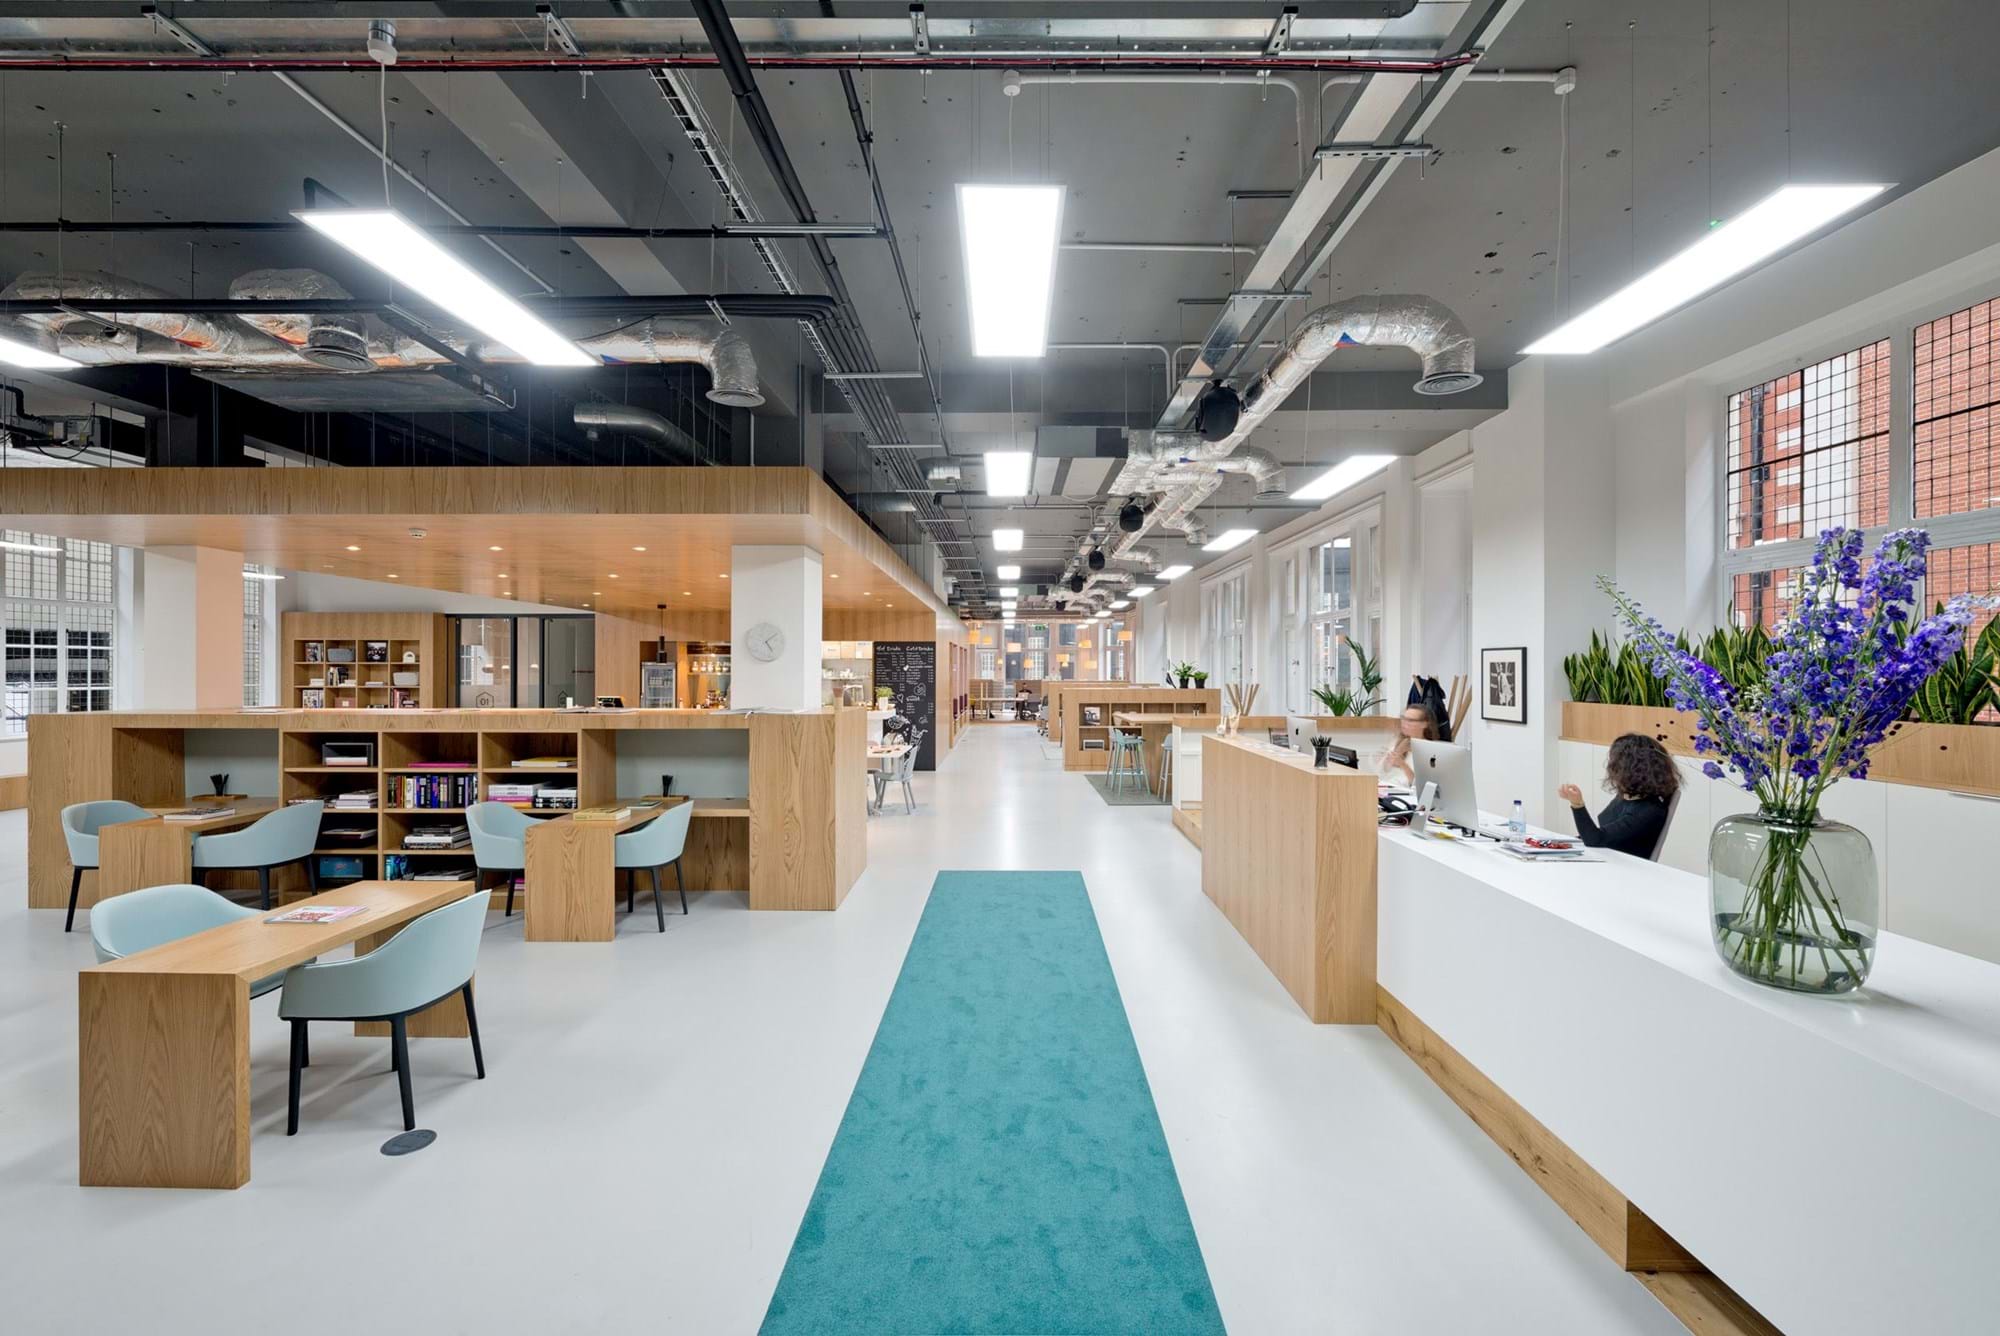 Modus Workspace office design, fit out and refurbishment - Spaces - Breakout - Mappin House 01 highres sRGB.jpg